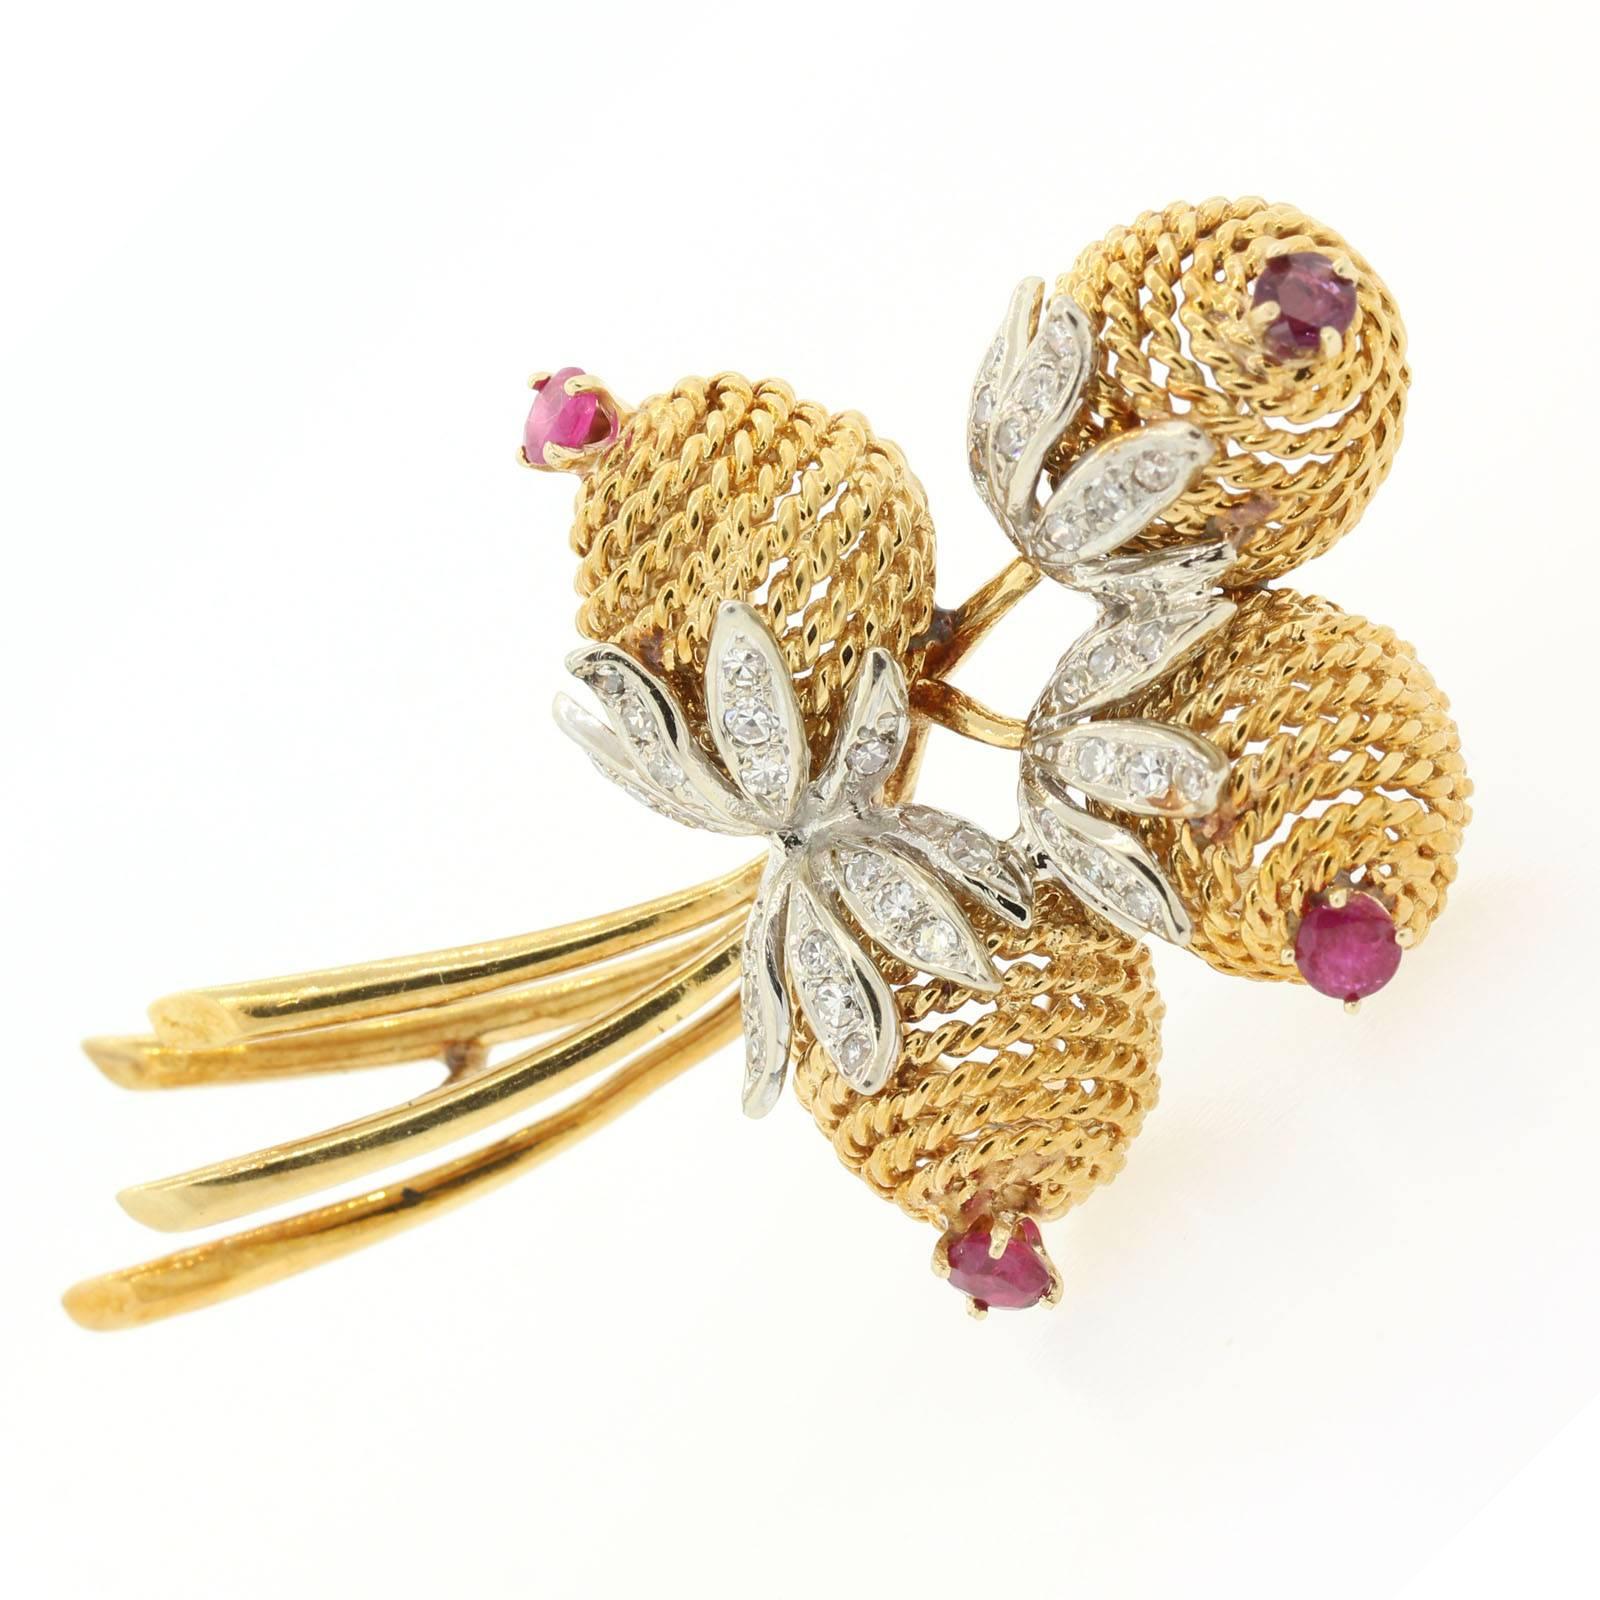 Vintage 1970s Cartier 18KT yellow gold bouquet brooch.  The brooch features four stylized flowers blooming from 18KT white gold diamond petals, and each flower is accented with a round cut Burma Ruby, the four weighing 0.65 carat.  The diamonds all